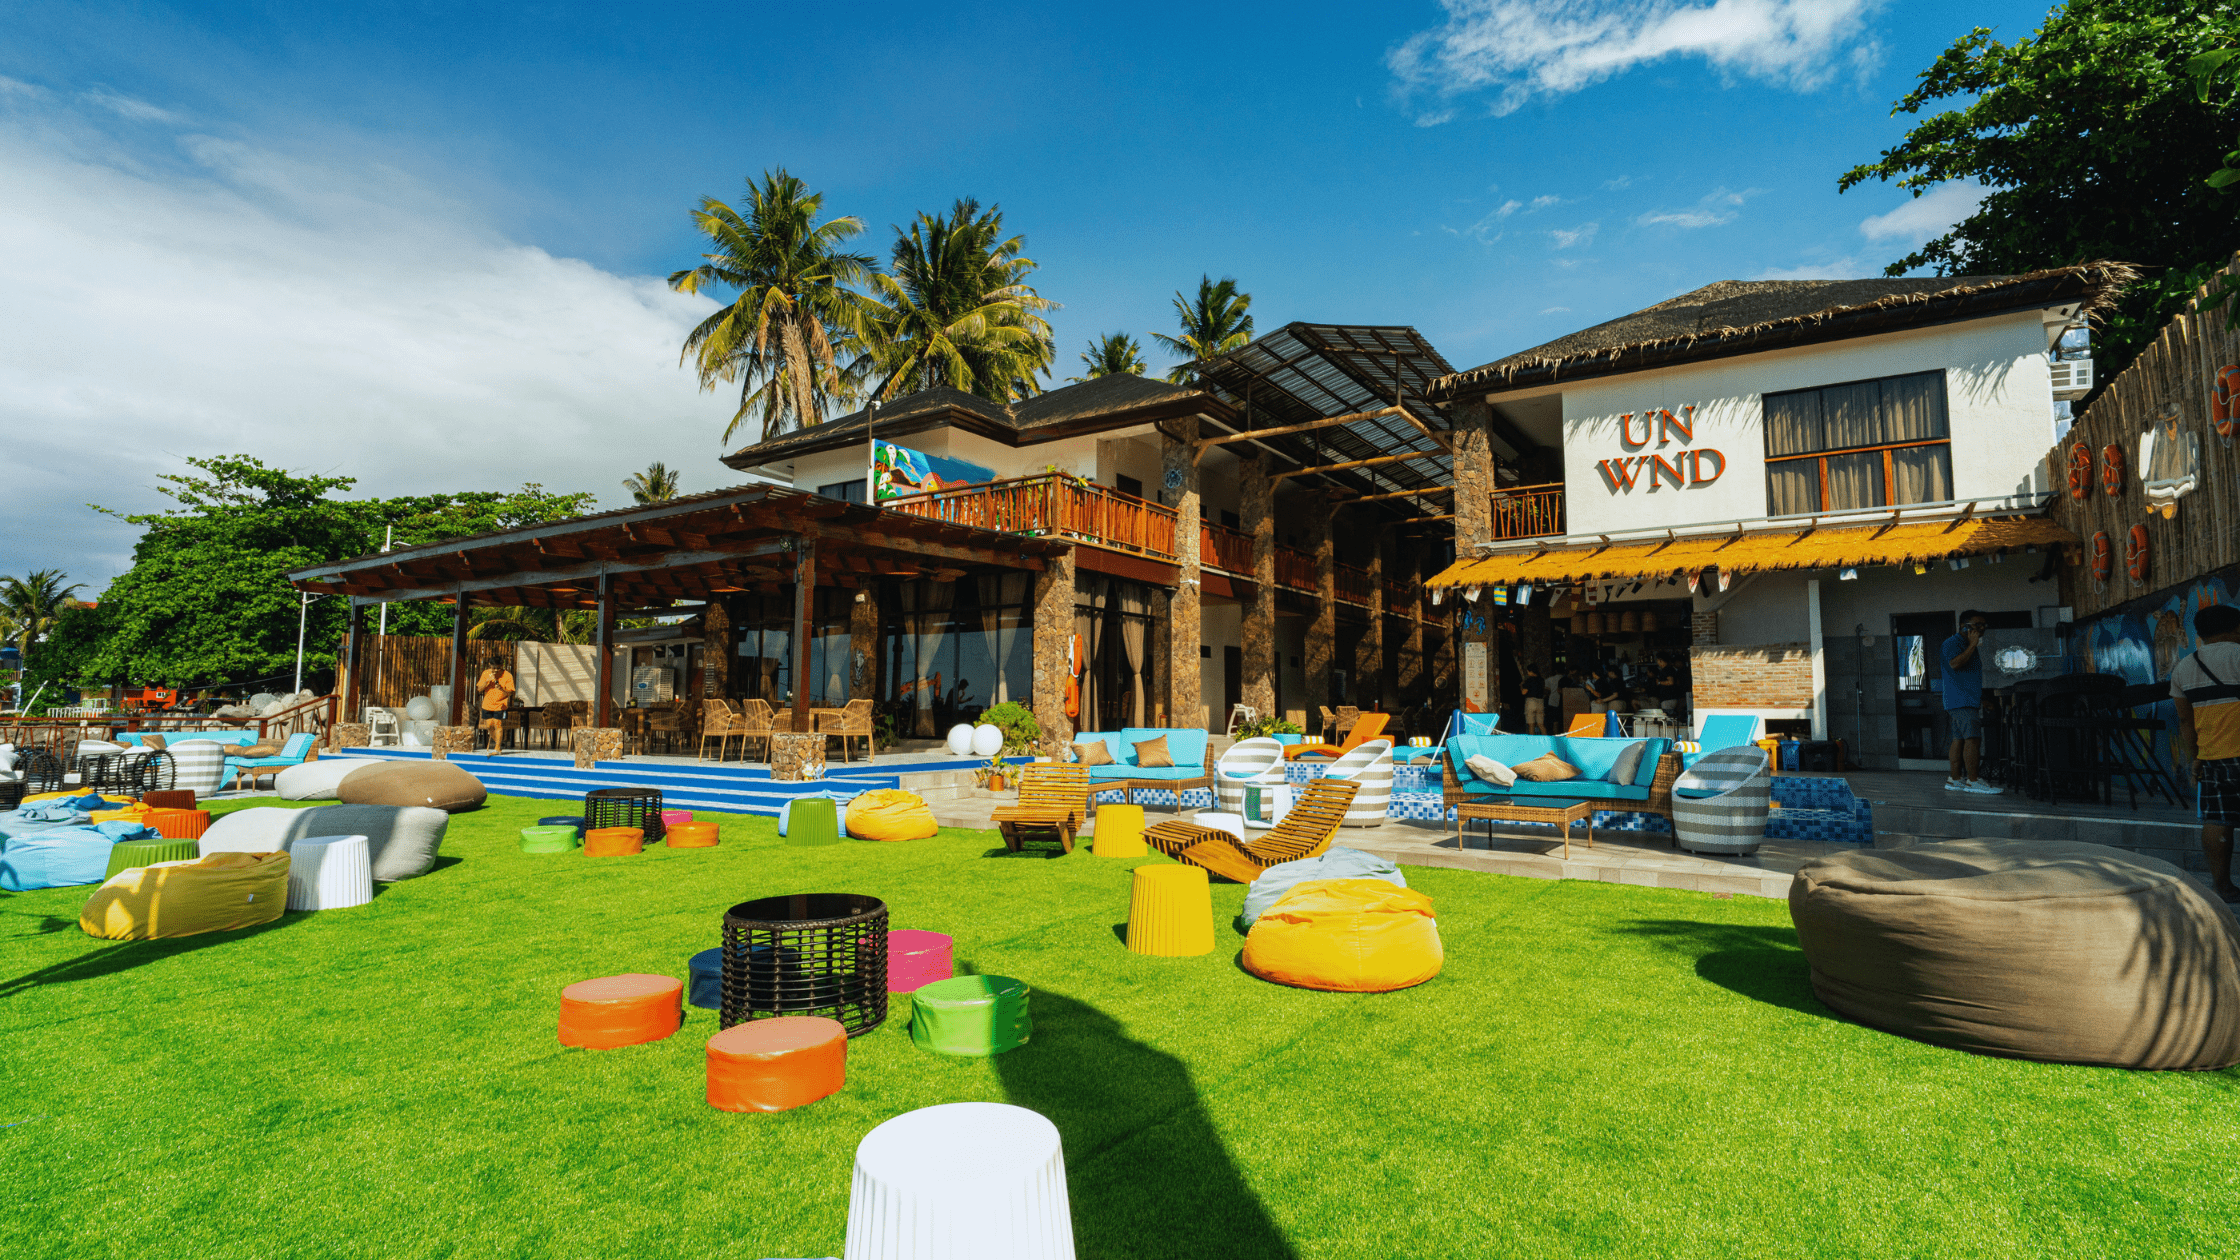 Redefining island staycation in UNWND Boutique Hotel Camiguin